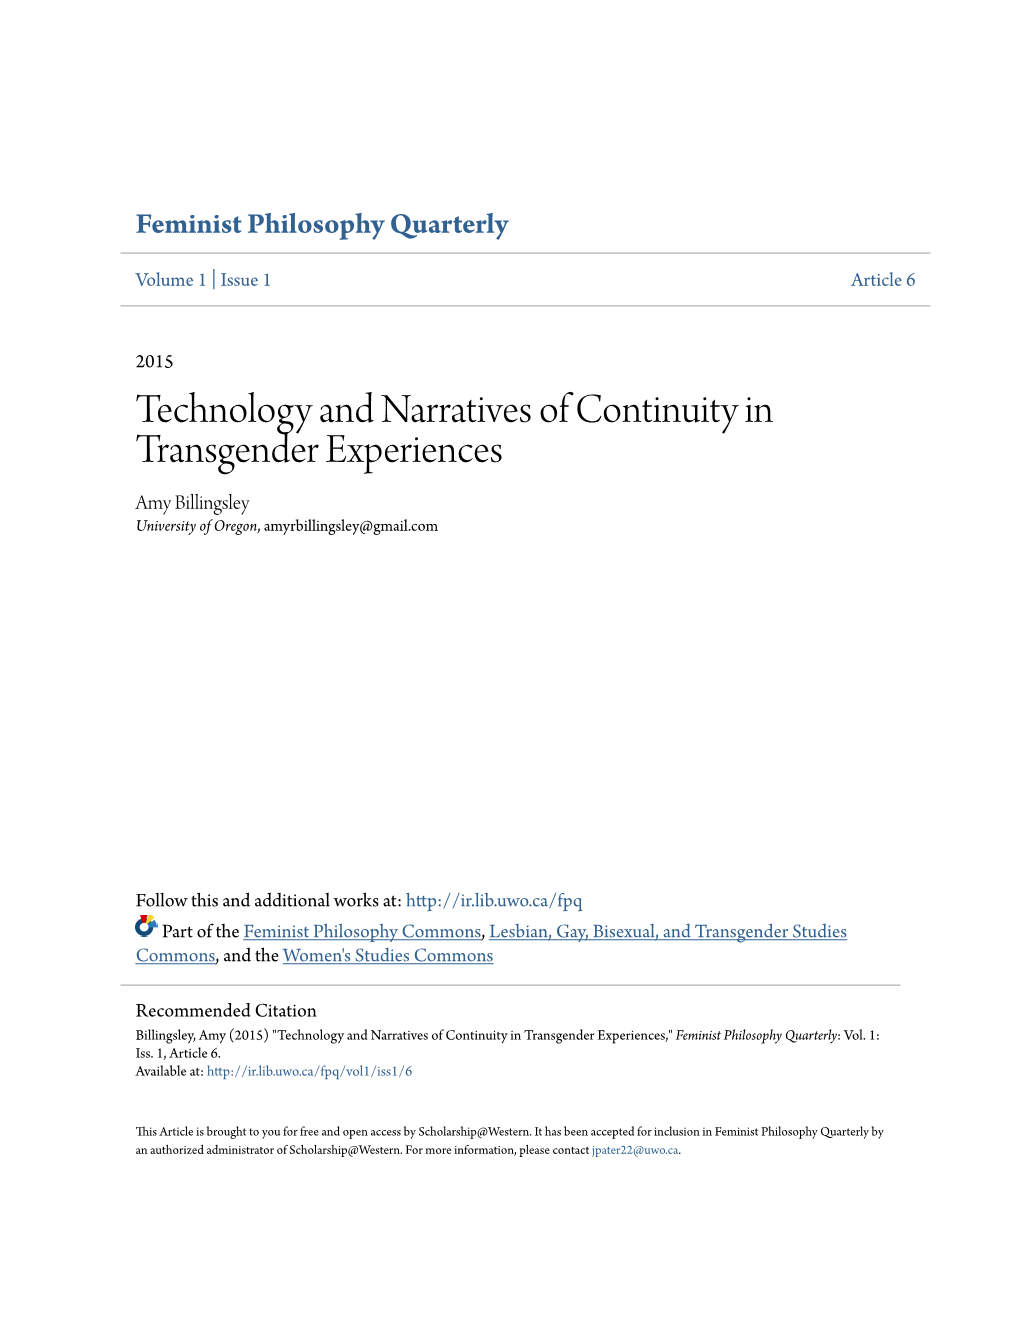 Technology and Narratives of Continuity in Transgender Experiences Amy Billingsley University of Oregon, Amyrbillingsley@Gmail.Com